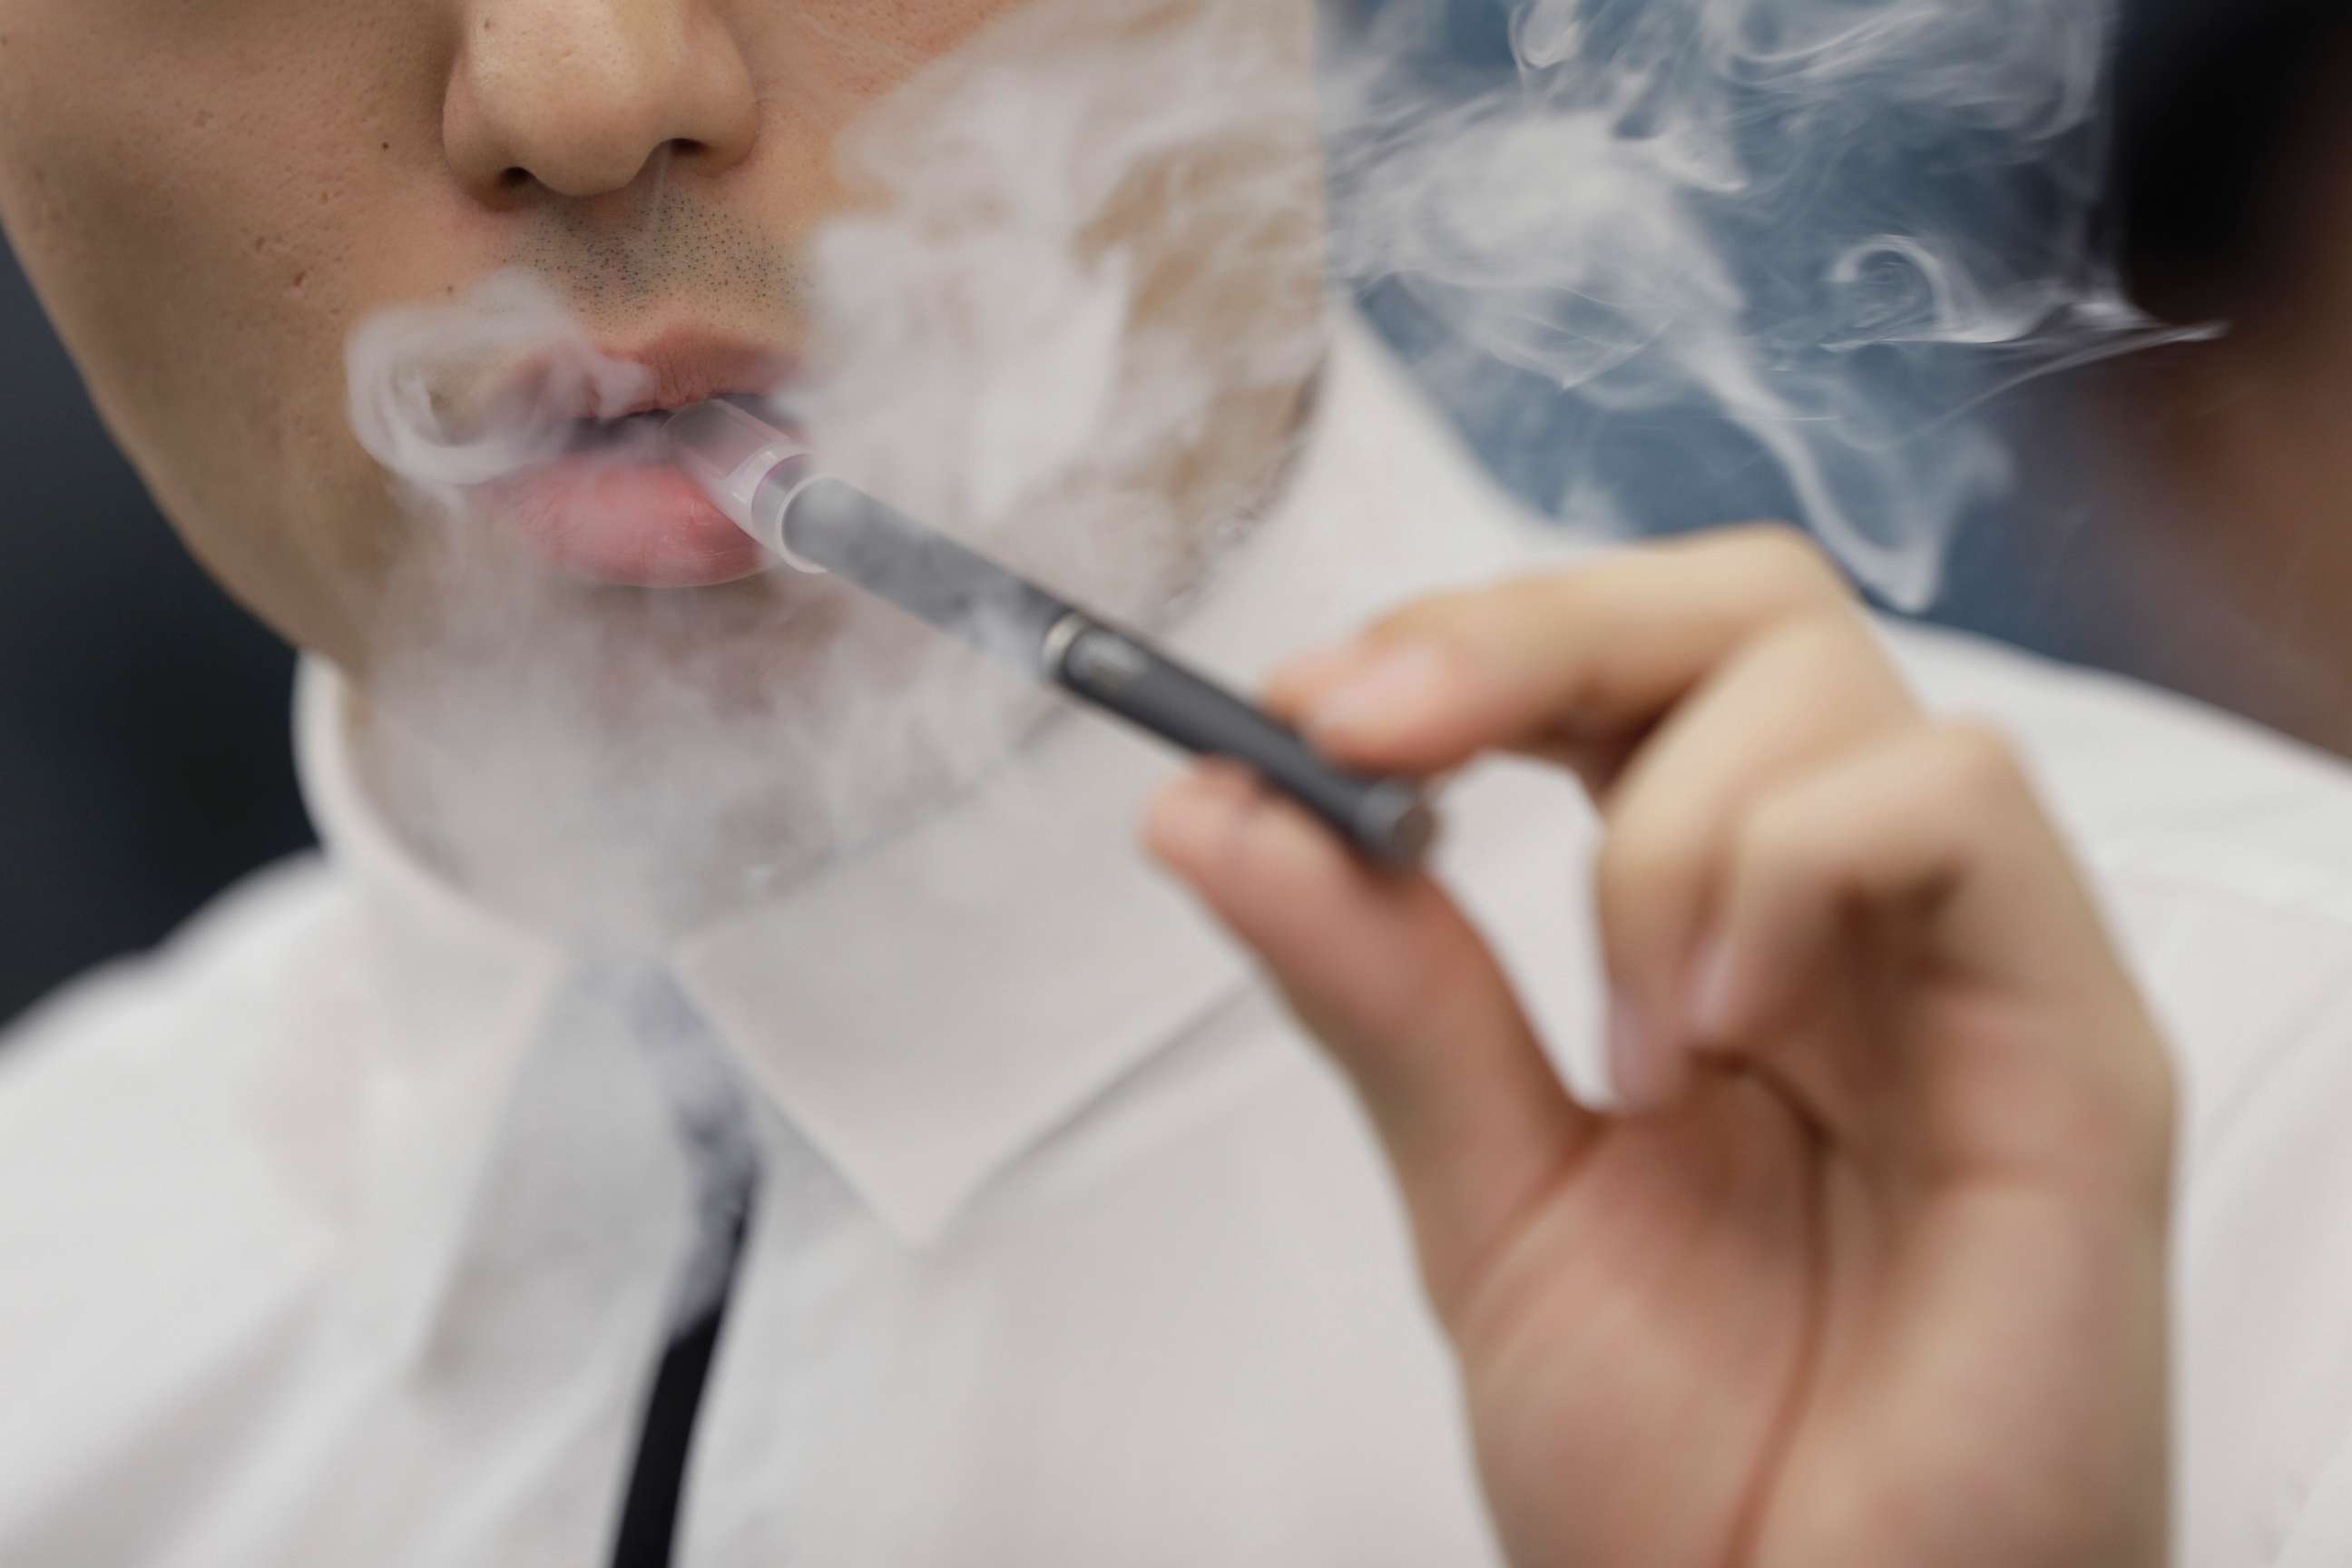 E Cigs Can Help Smokers Quit But May Lead Teens And Young Adults To Nicotine Addiction Report 